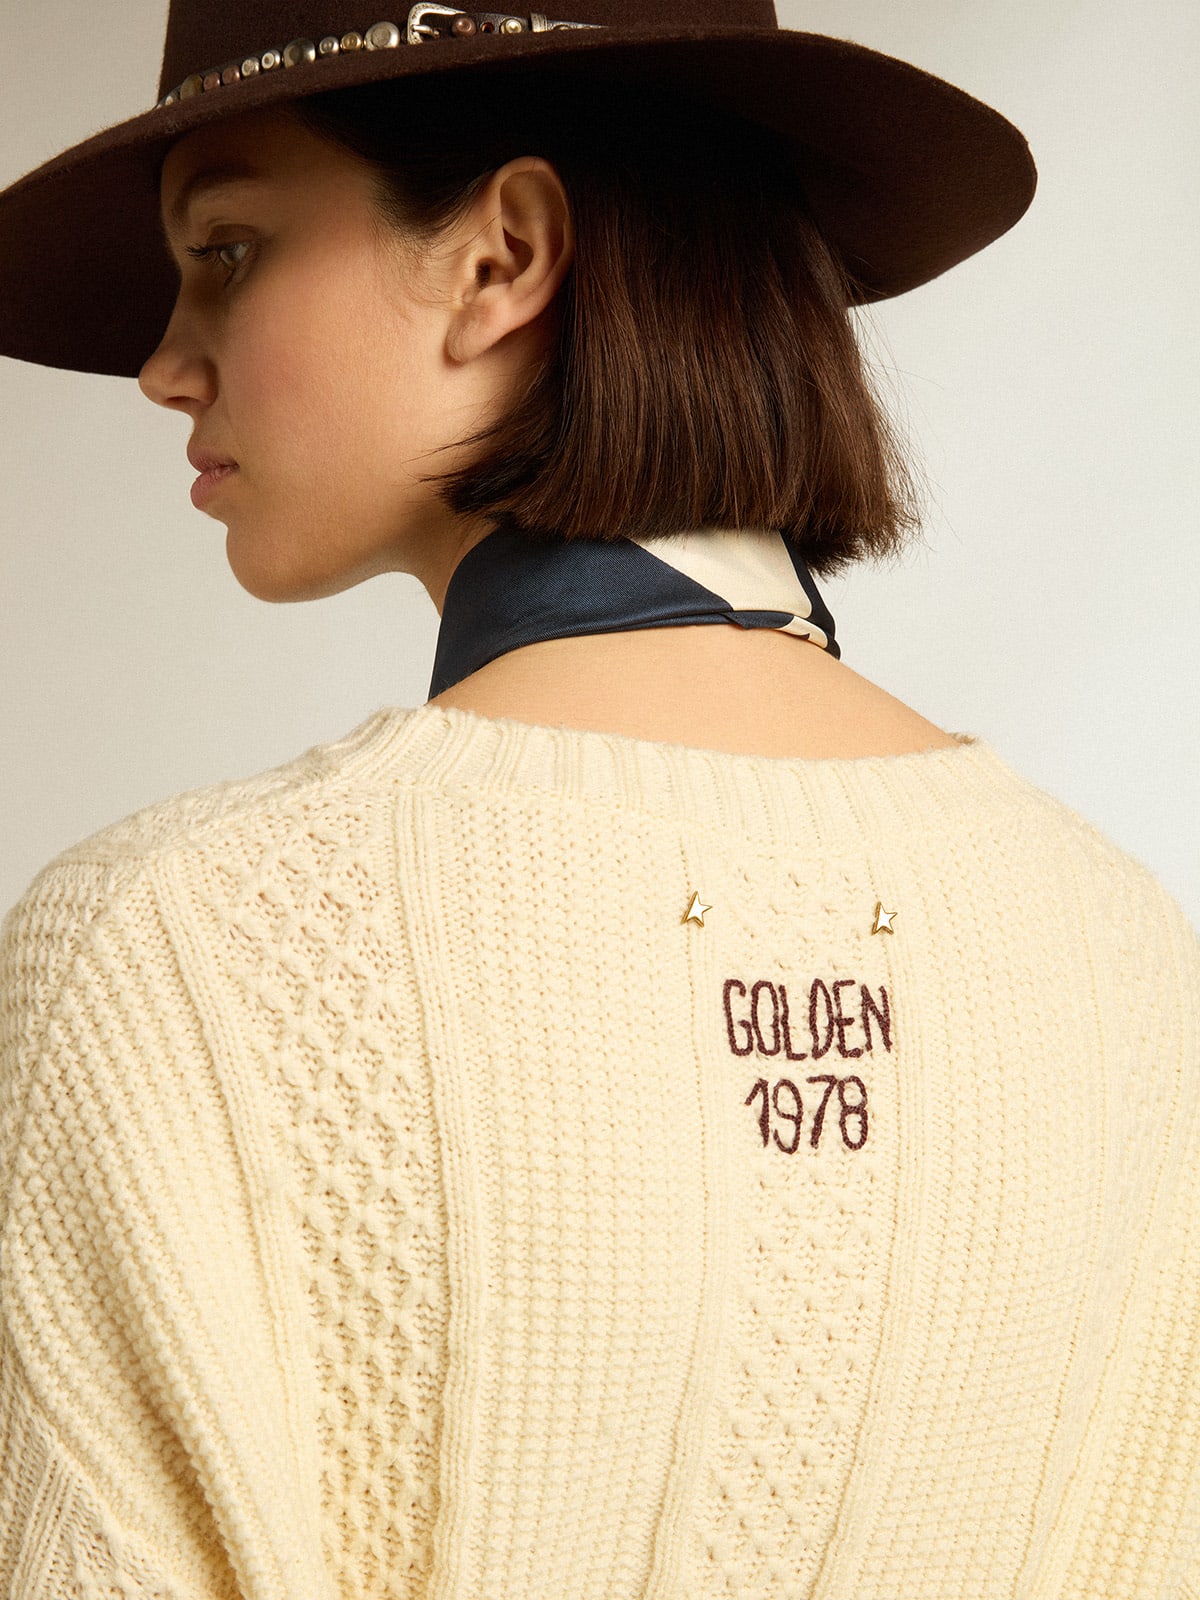 Golden Goose - Wool dress with embroidery on the back in 